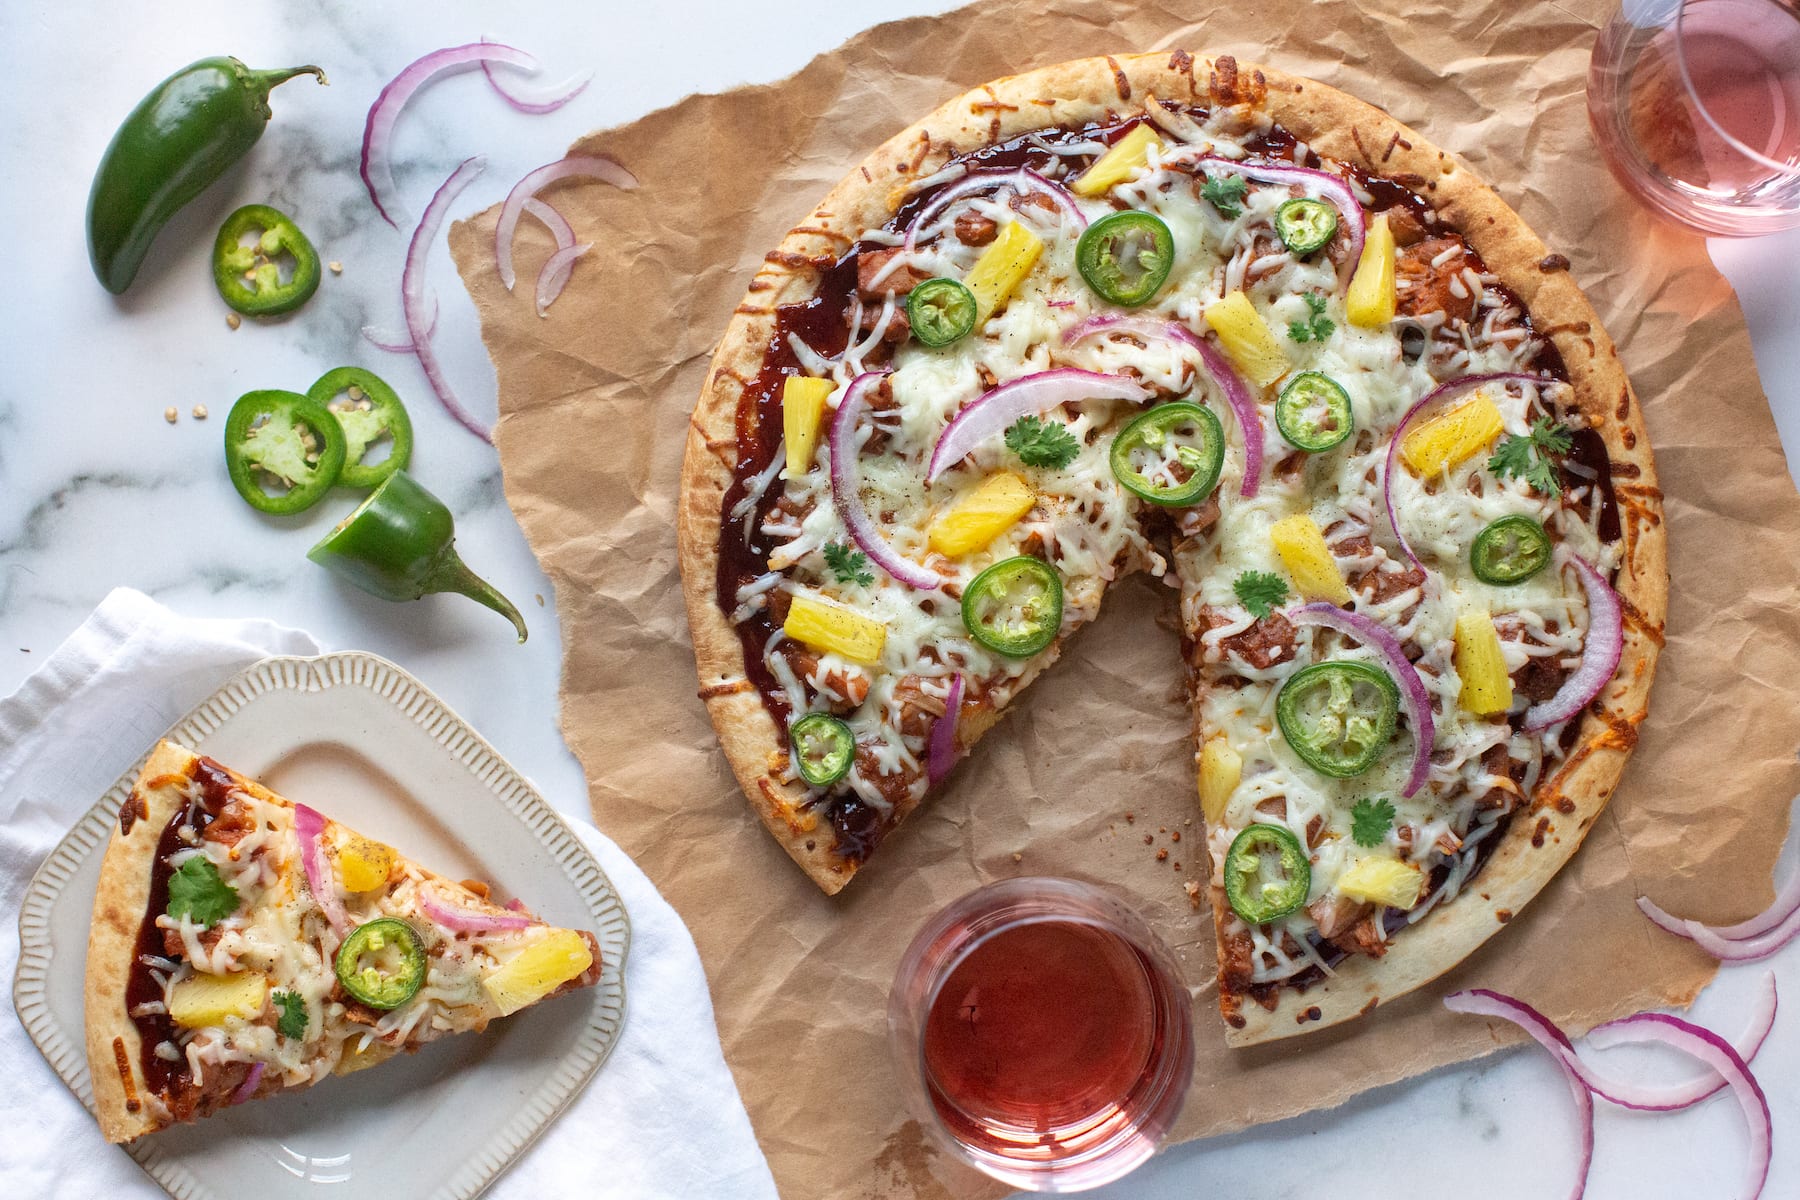 Image Picture of a pizza topped with barbecue sauce, plant-based meat substitute jackfruit, vegan mozzarella, sliced jalapeños, pineapples chunks, and sliced red onion